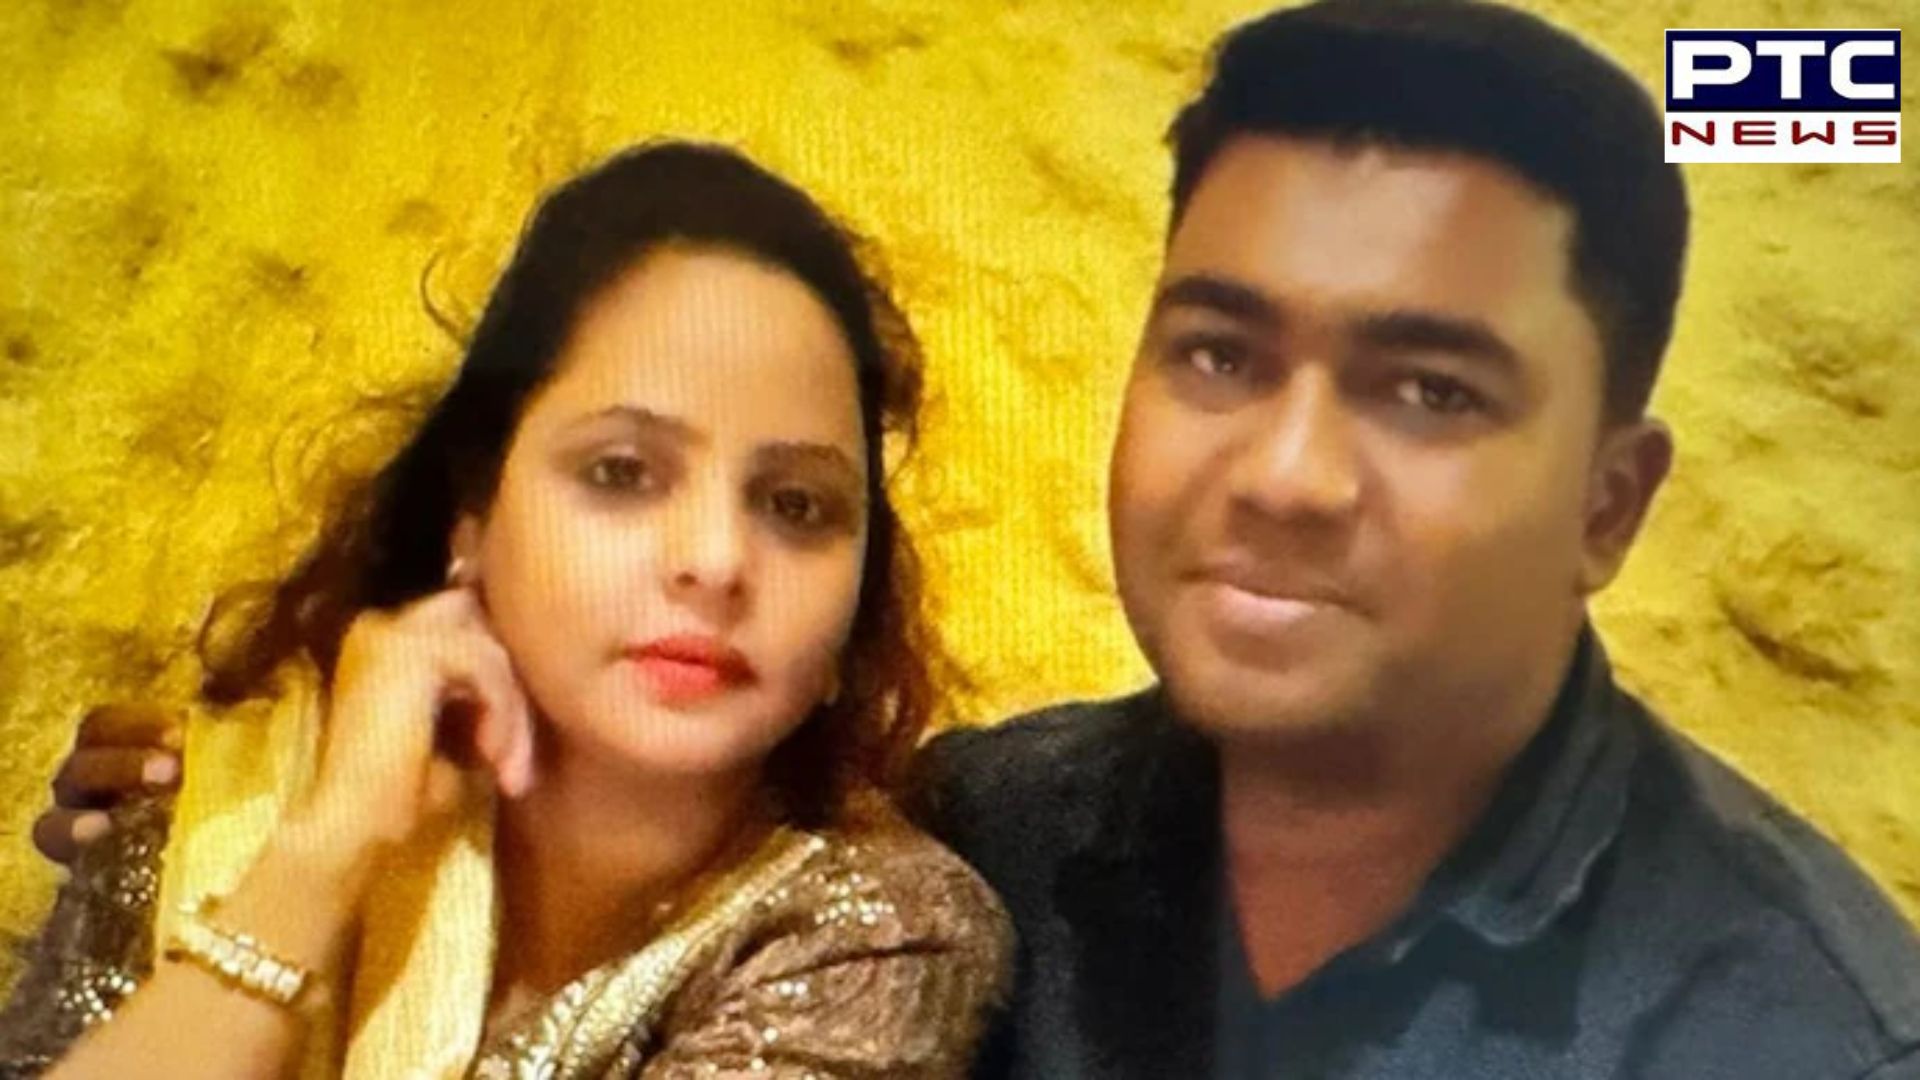 Bengaluru cab driver brutally attacks girlfriend after marriage proposal rejection